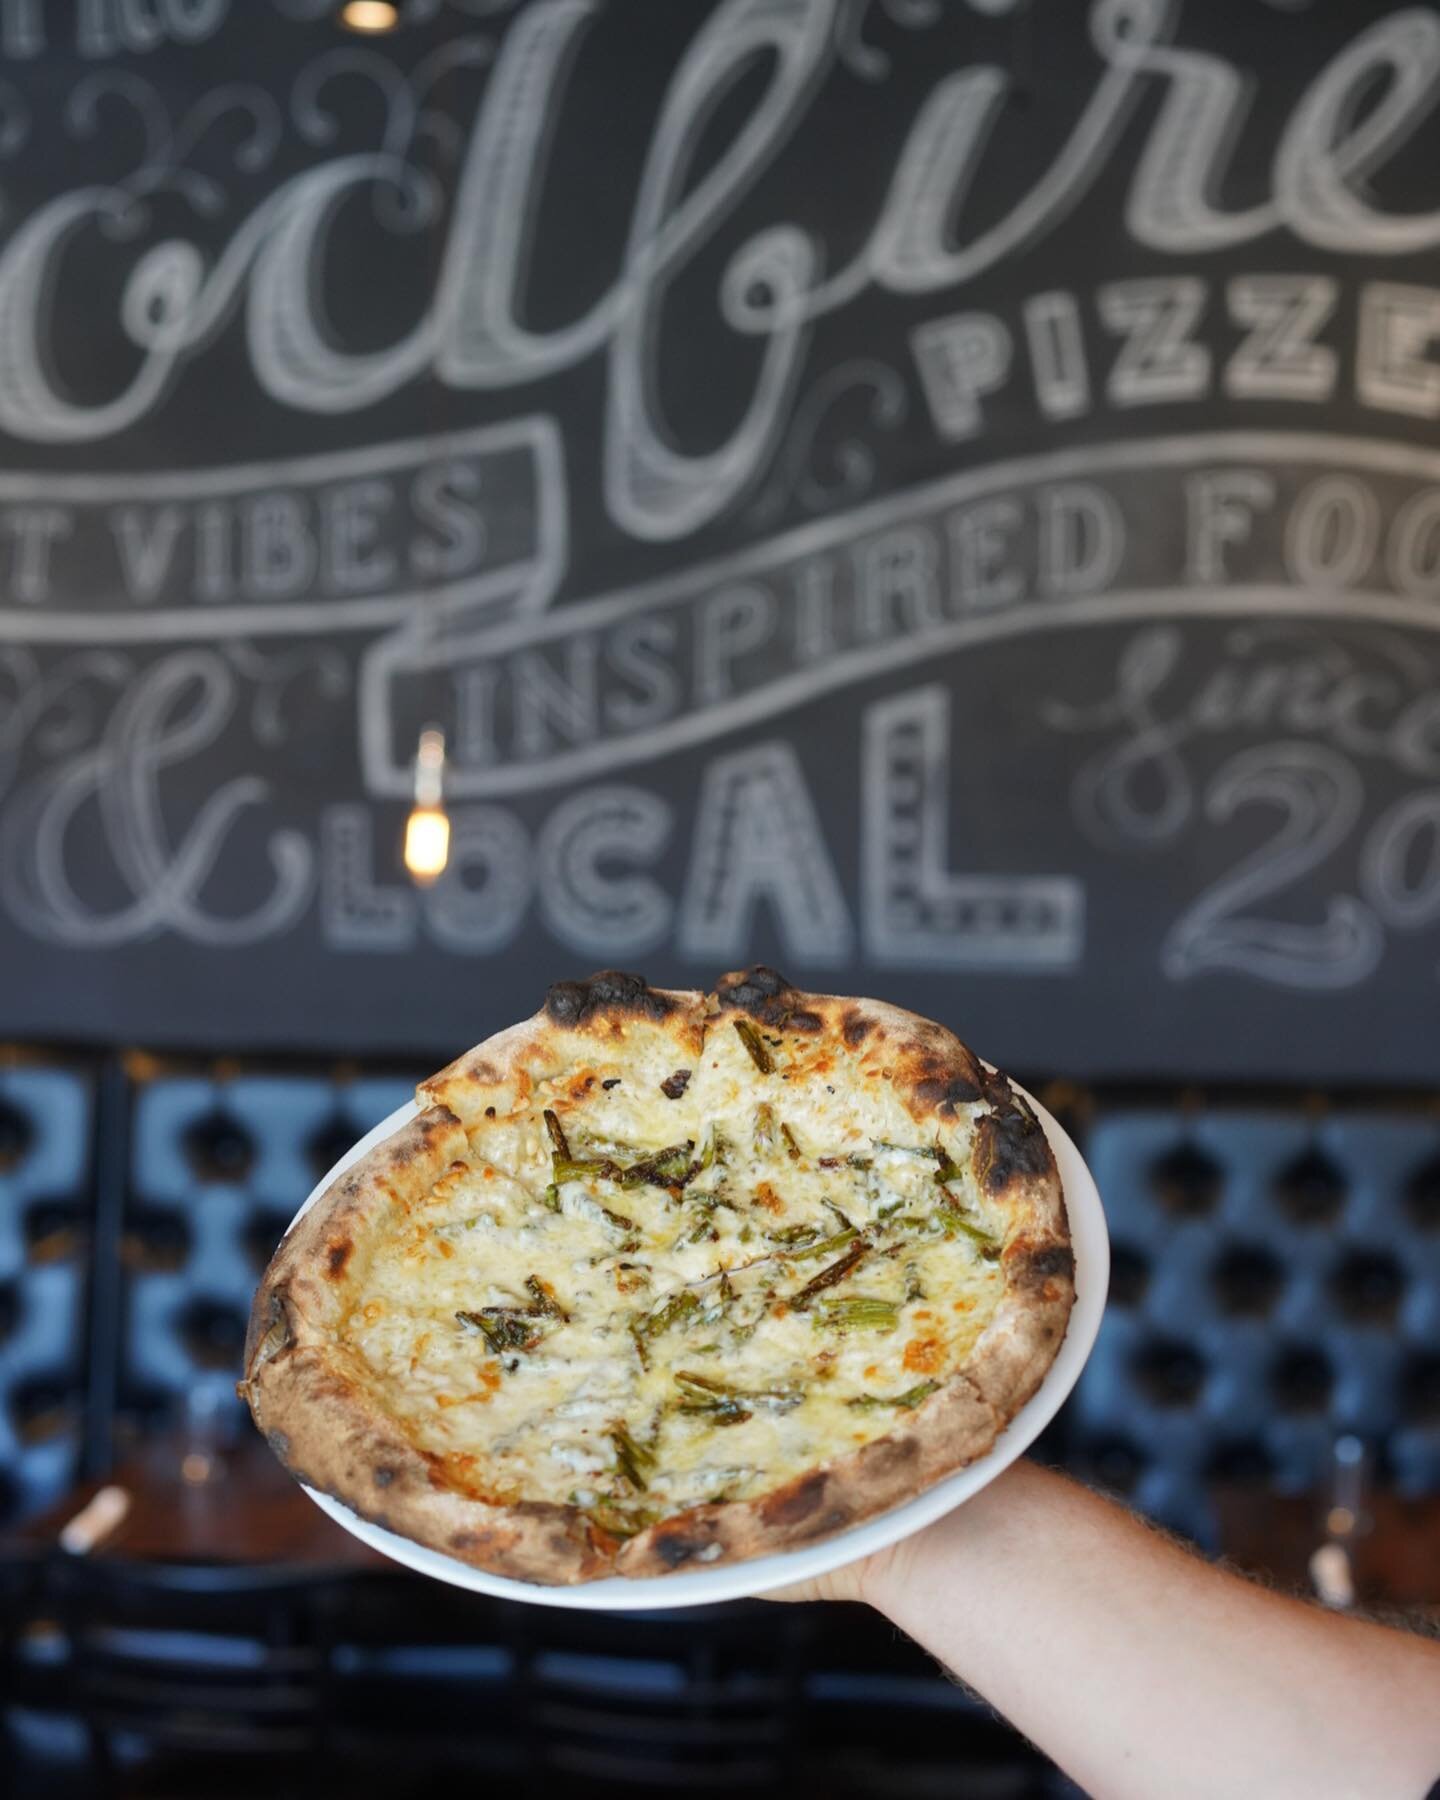 🍕 SPECIAL OF THE WEEK 🍕

The Roasted Asparagus: 
Fresh brick mozzarella, fontina, asparagus, pine nuts and grated parmesan. 

It&rsquo;s a favorite for a reason, we&rsquo;ll see y&rsquo;all soon.